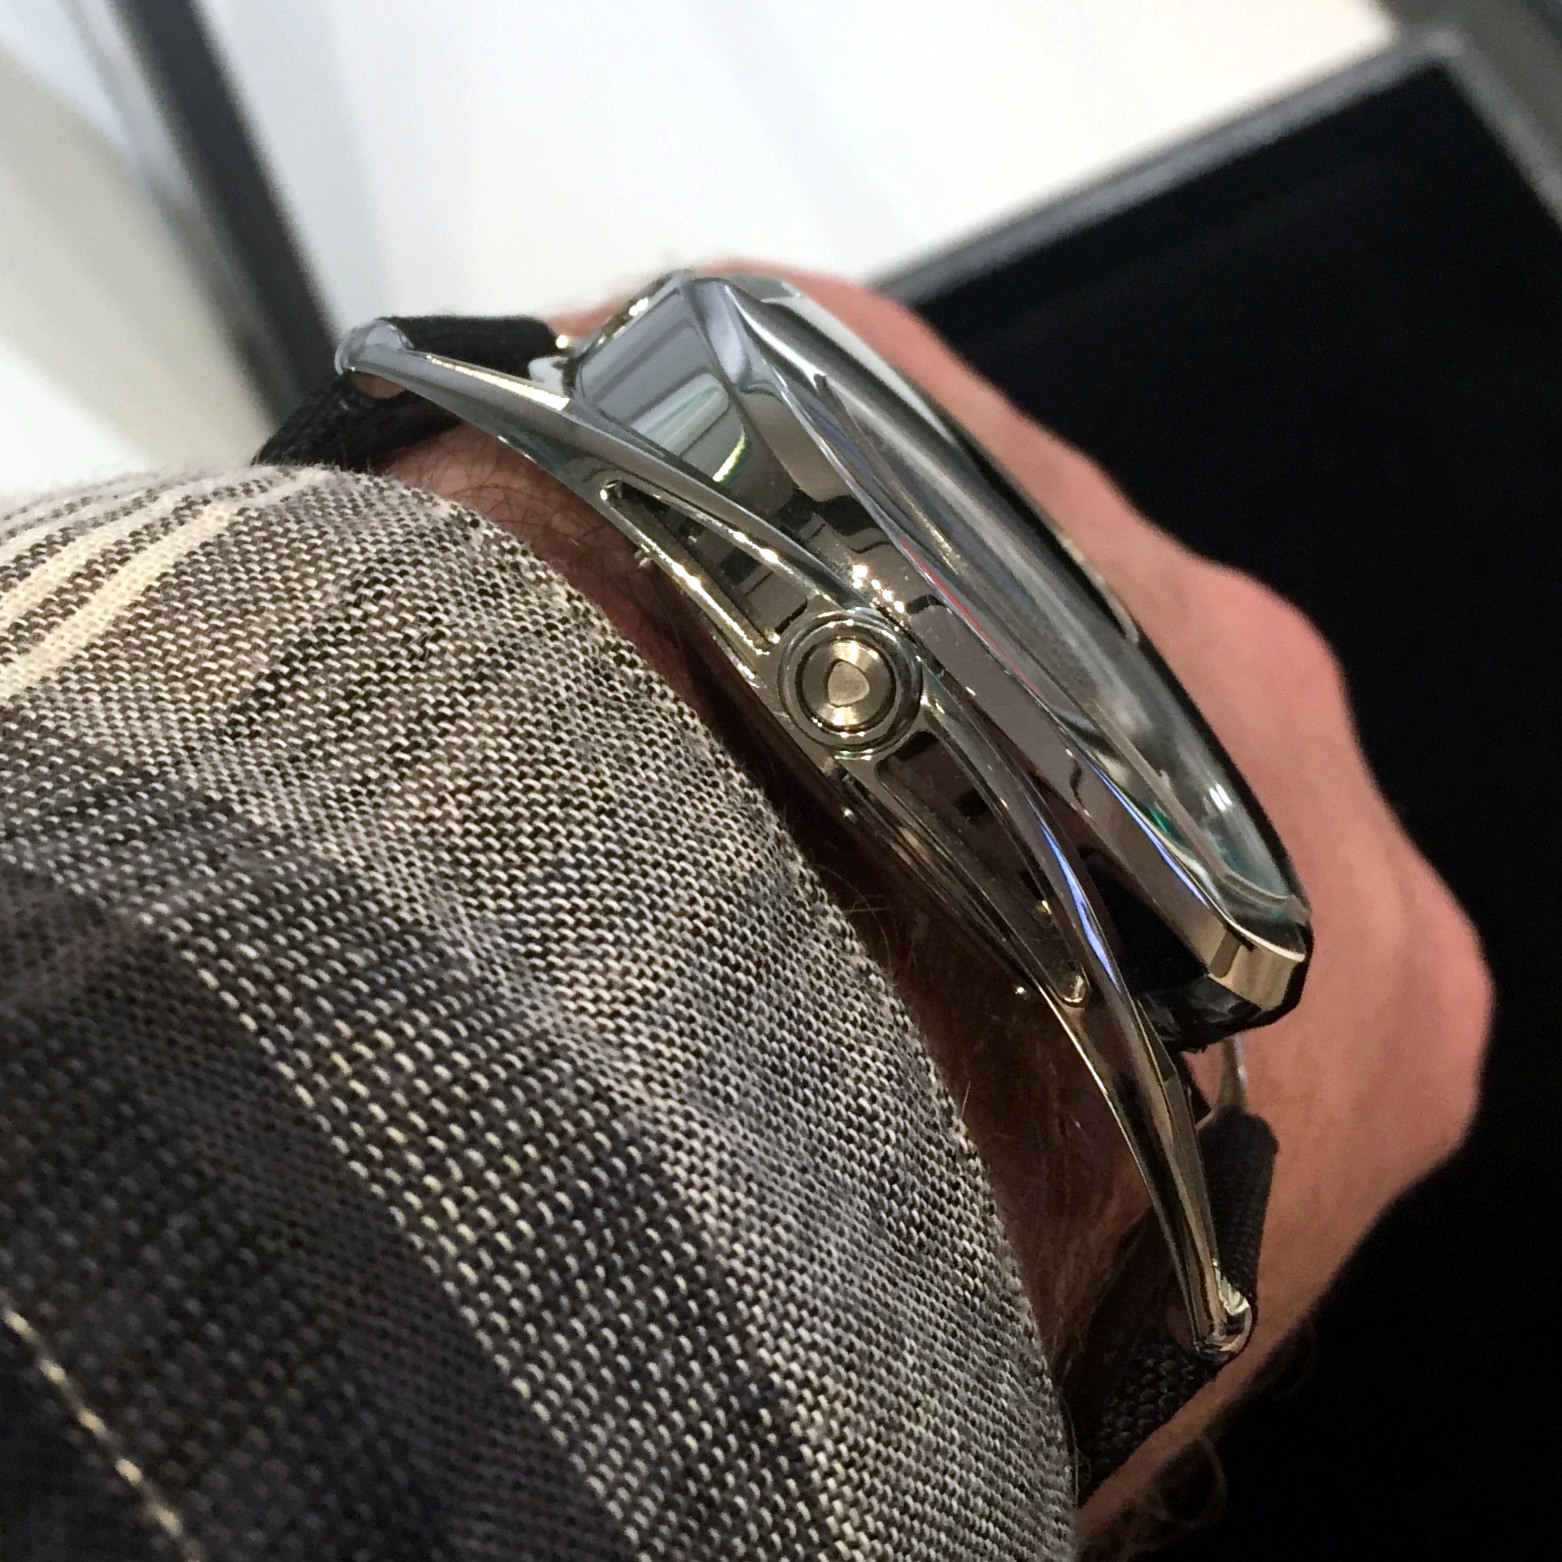 DeBethune & Urwerk Moon Satellite for OnlyWatch 2019 - one of my favourite watch experiences of 2019